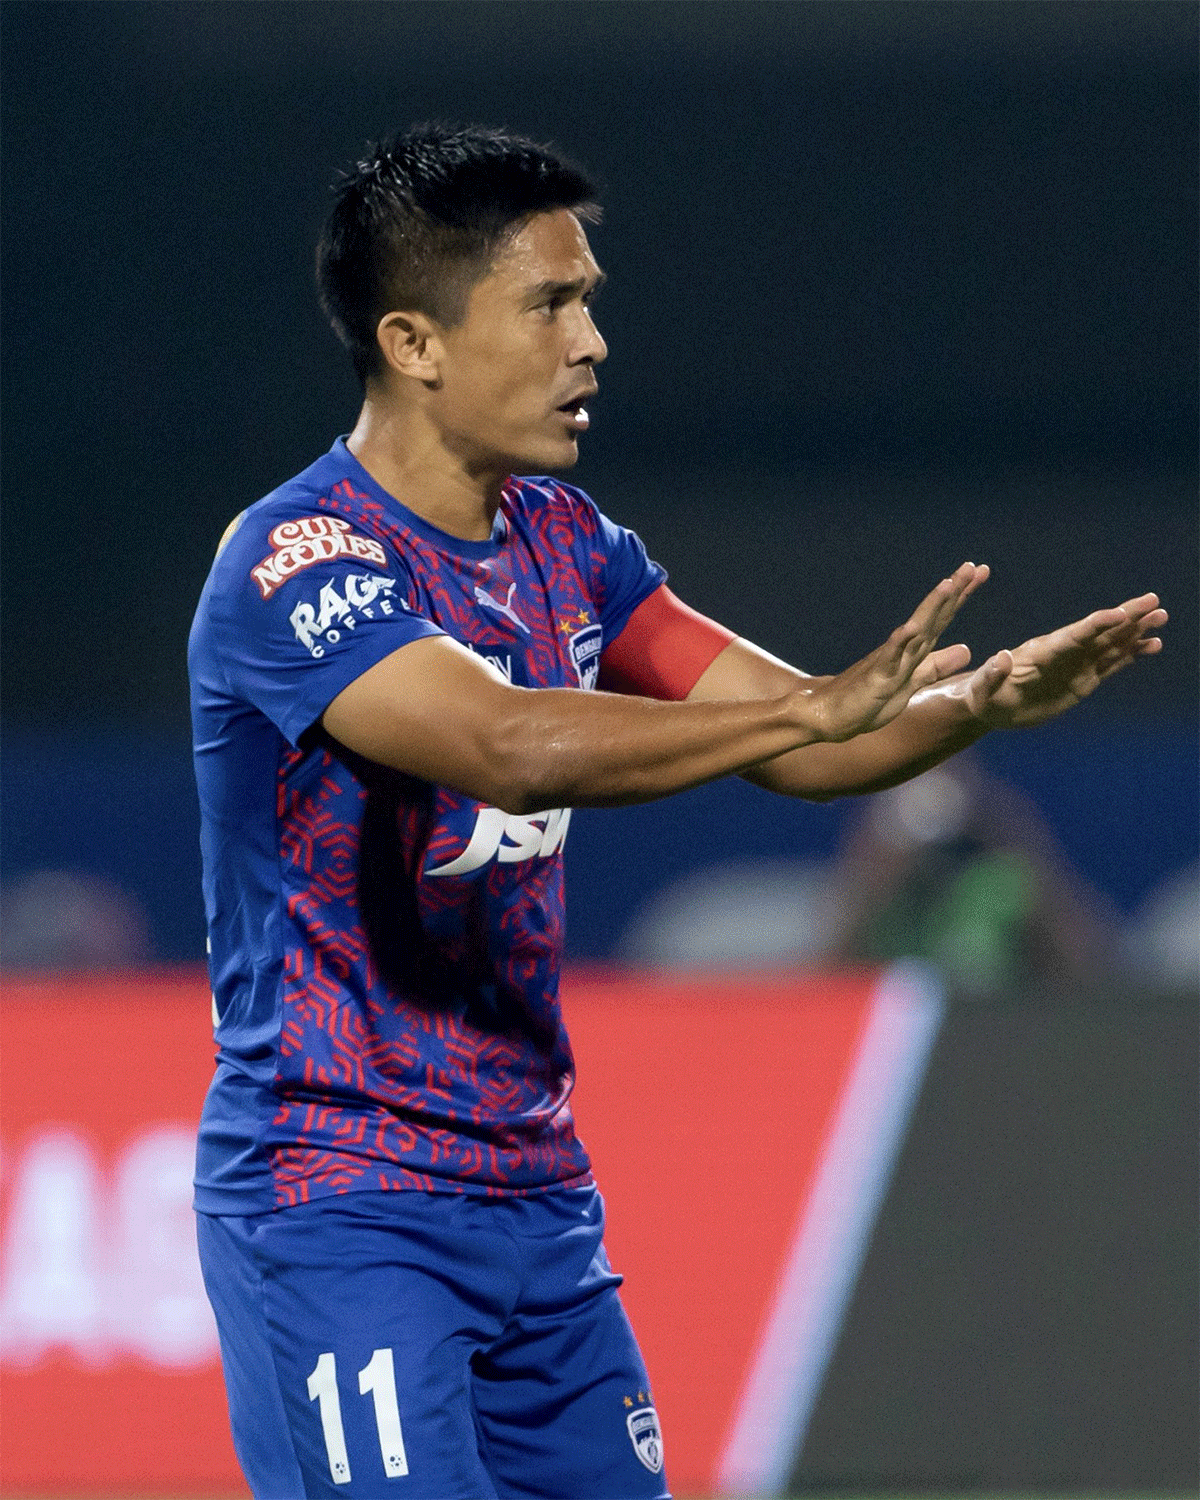 Sunil Chhetri became the all-time ISL top scorer scoring his 50th goal against Hyderabad FC on Friday.